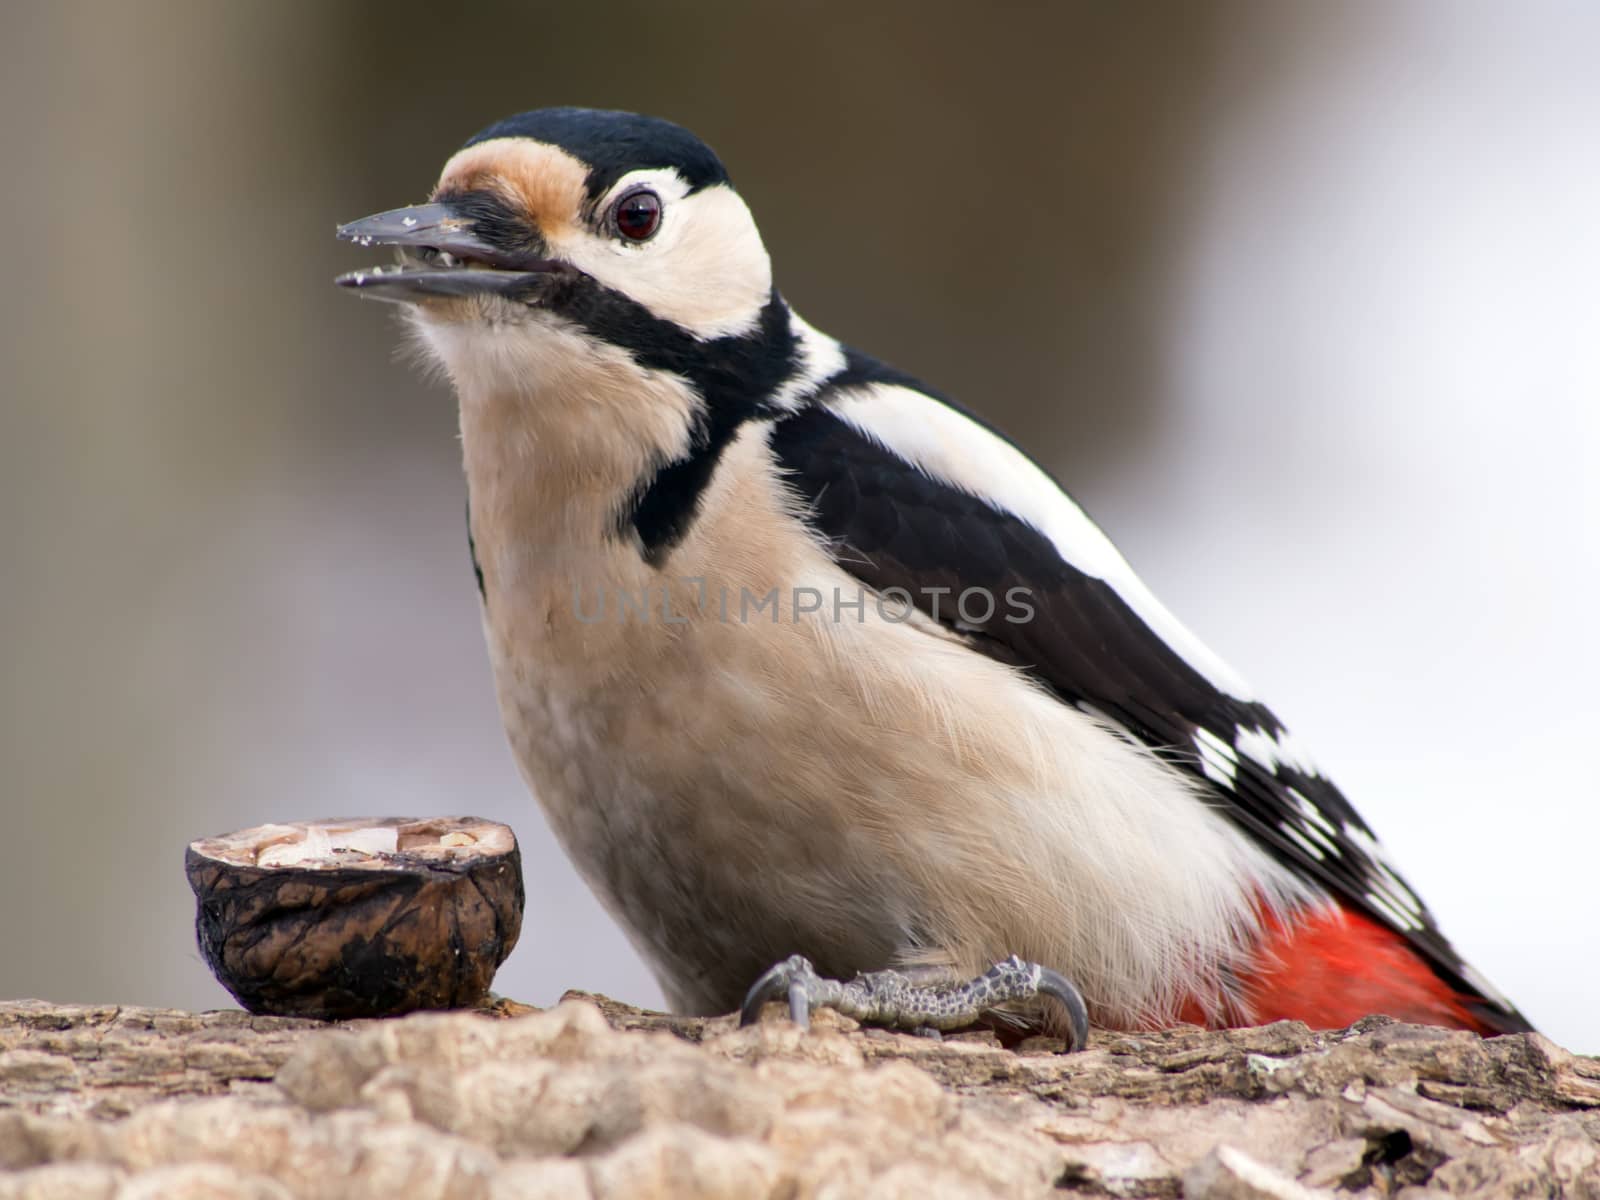 Great Spotted Woodpecker (Dendrocopos major) in the bird feeder.
